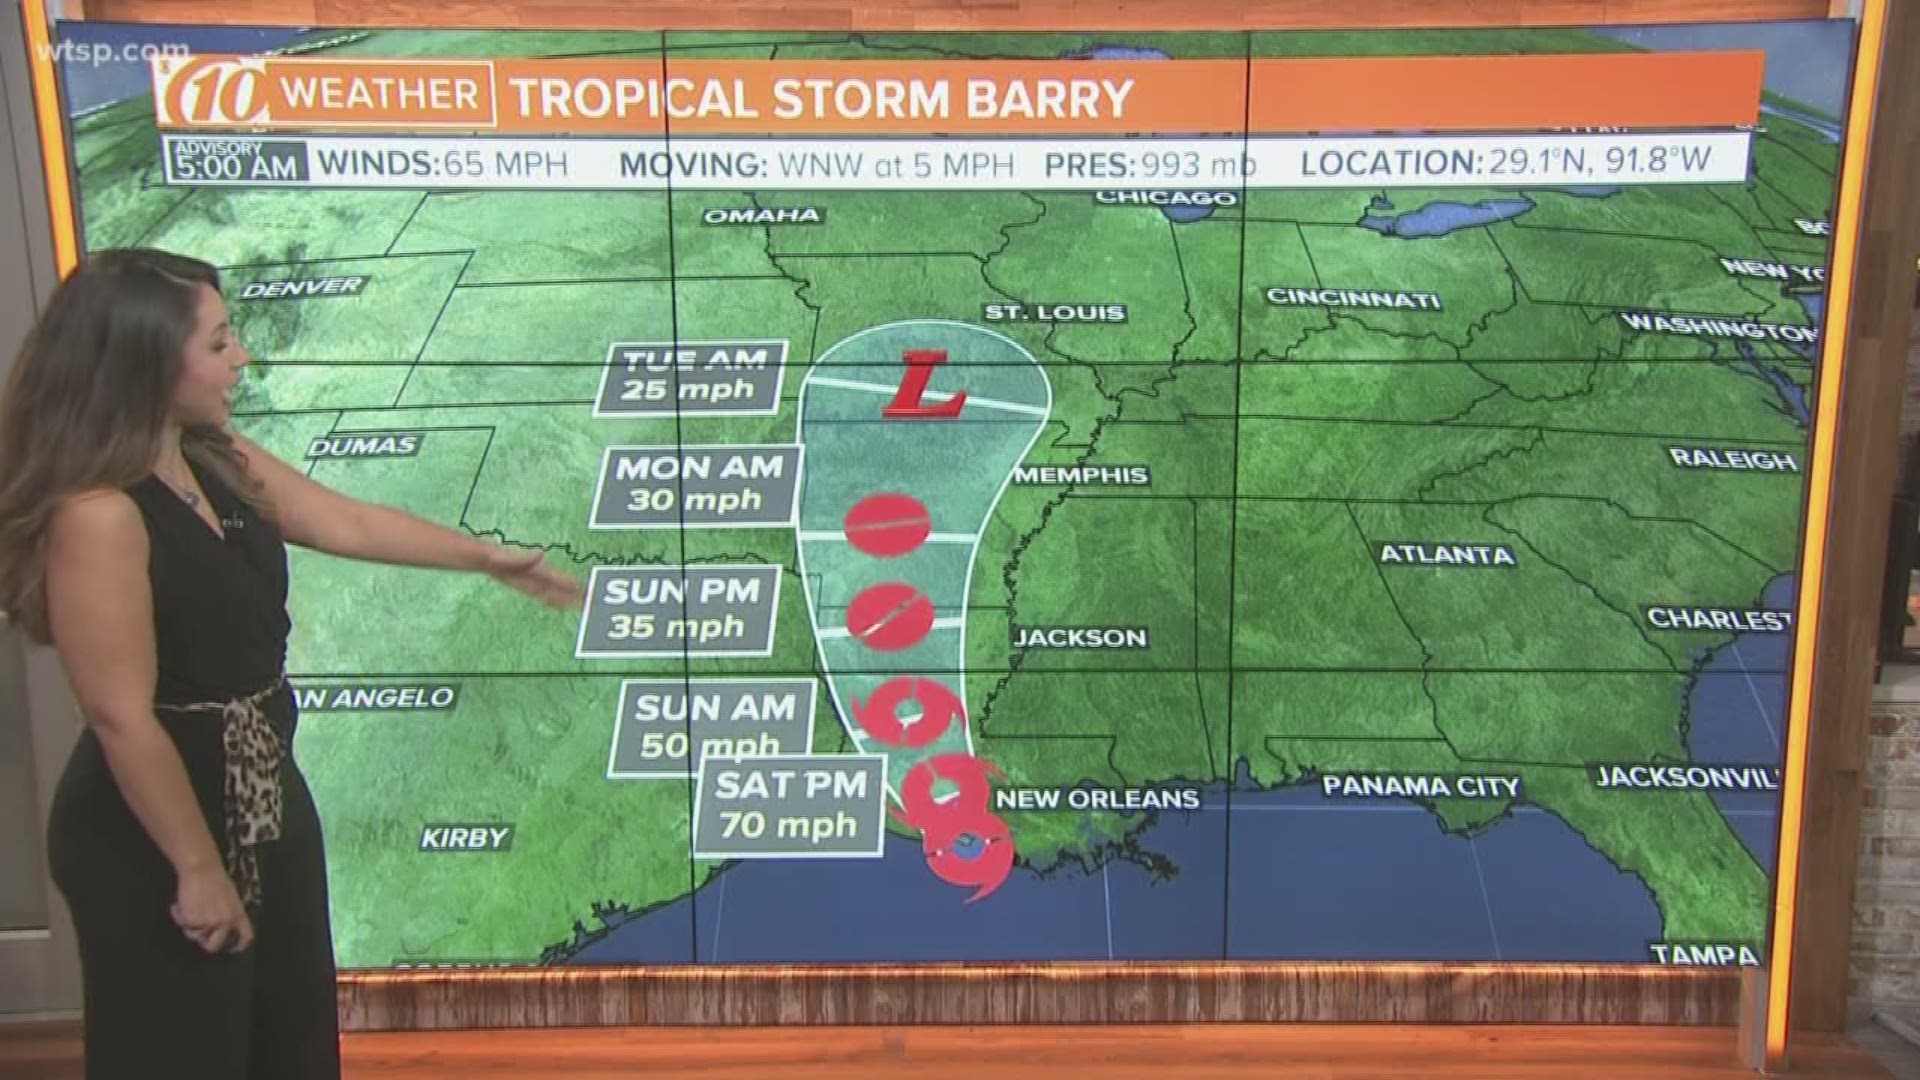 Tropical Storm Barry is expected to be a hurricane by landfall Saturday. Dangerous storm surge, heavy rains and strong winds are expected across the north-central Gulf coast. At 6 a.m. ET Saturday, it was located about 55 miles southwest Morgan City, Louisiana. Maximum sustained winds are being clocked at 65 mph. The storm is moving west-northwest at 5 mph.